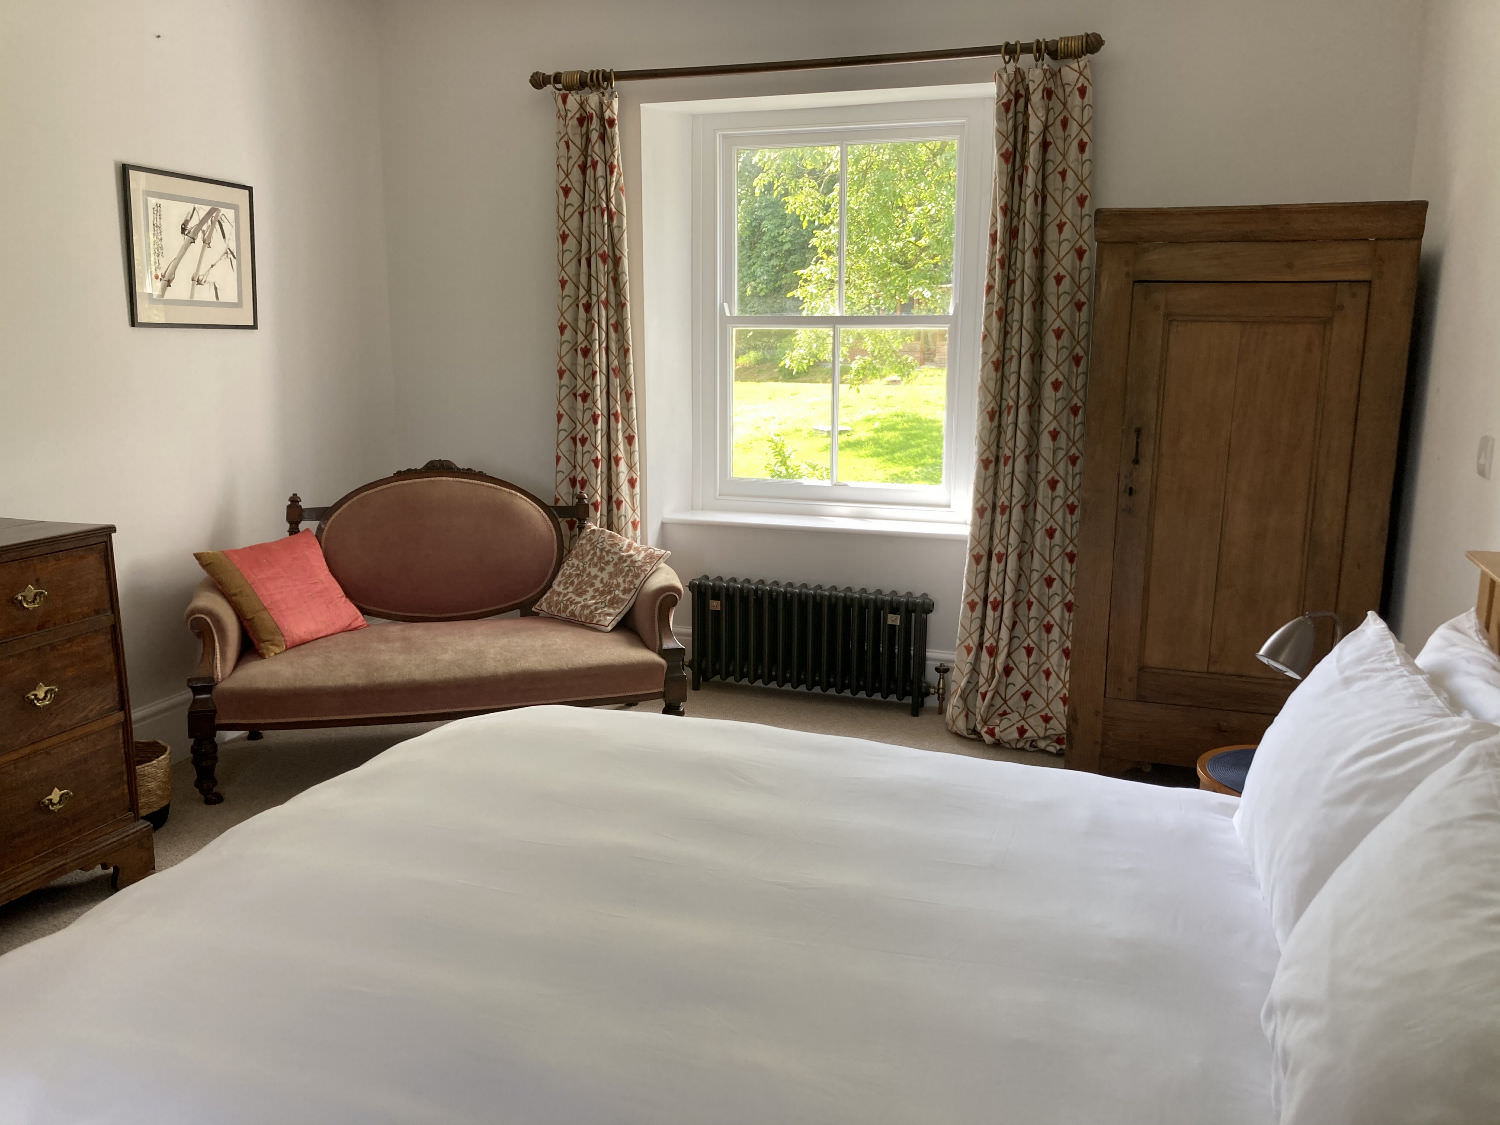 Image showing large double bedroom, white bed covers, other furniture and a view to the garden.